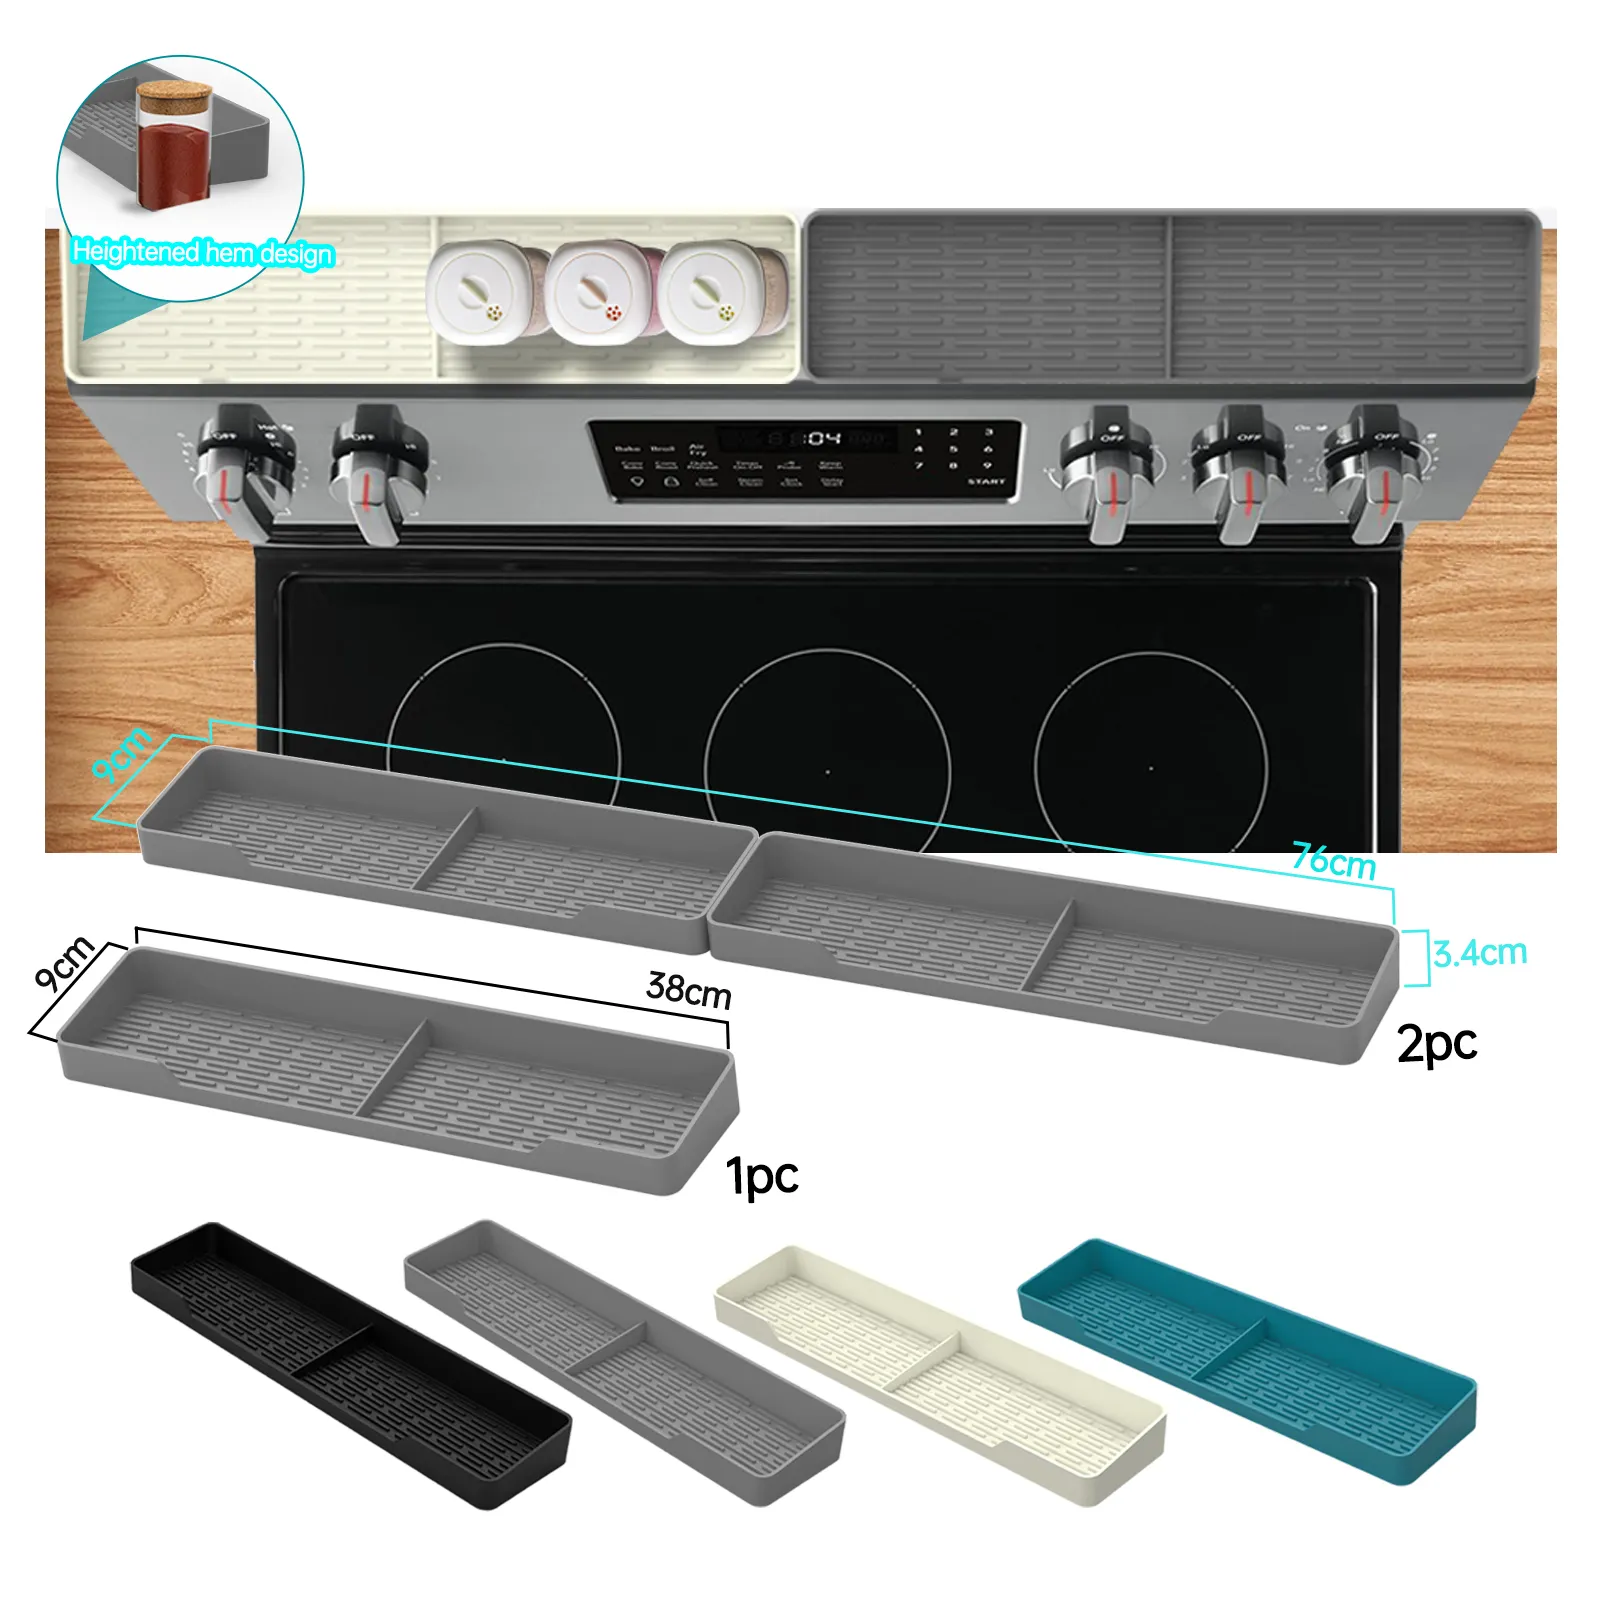 Silicone Stove Top Magnetic Shelf, Kitchen Organizer Over The Stove Spice Rack Magnetic Over Oven Organizer Shelf